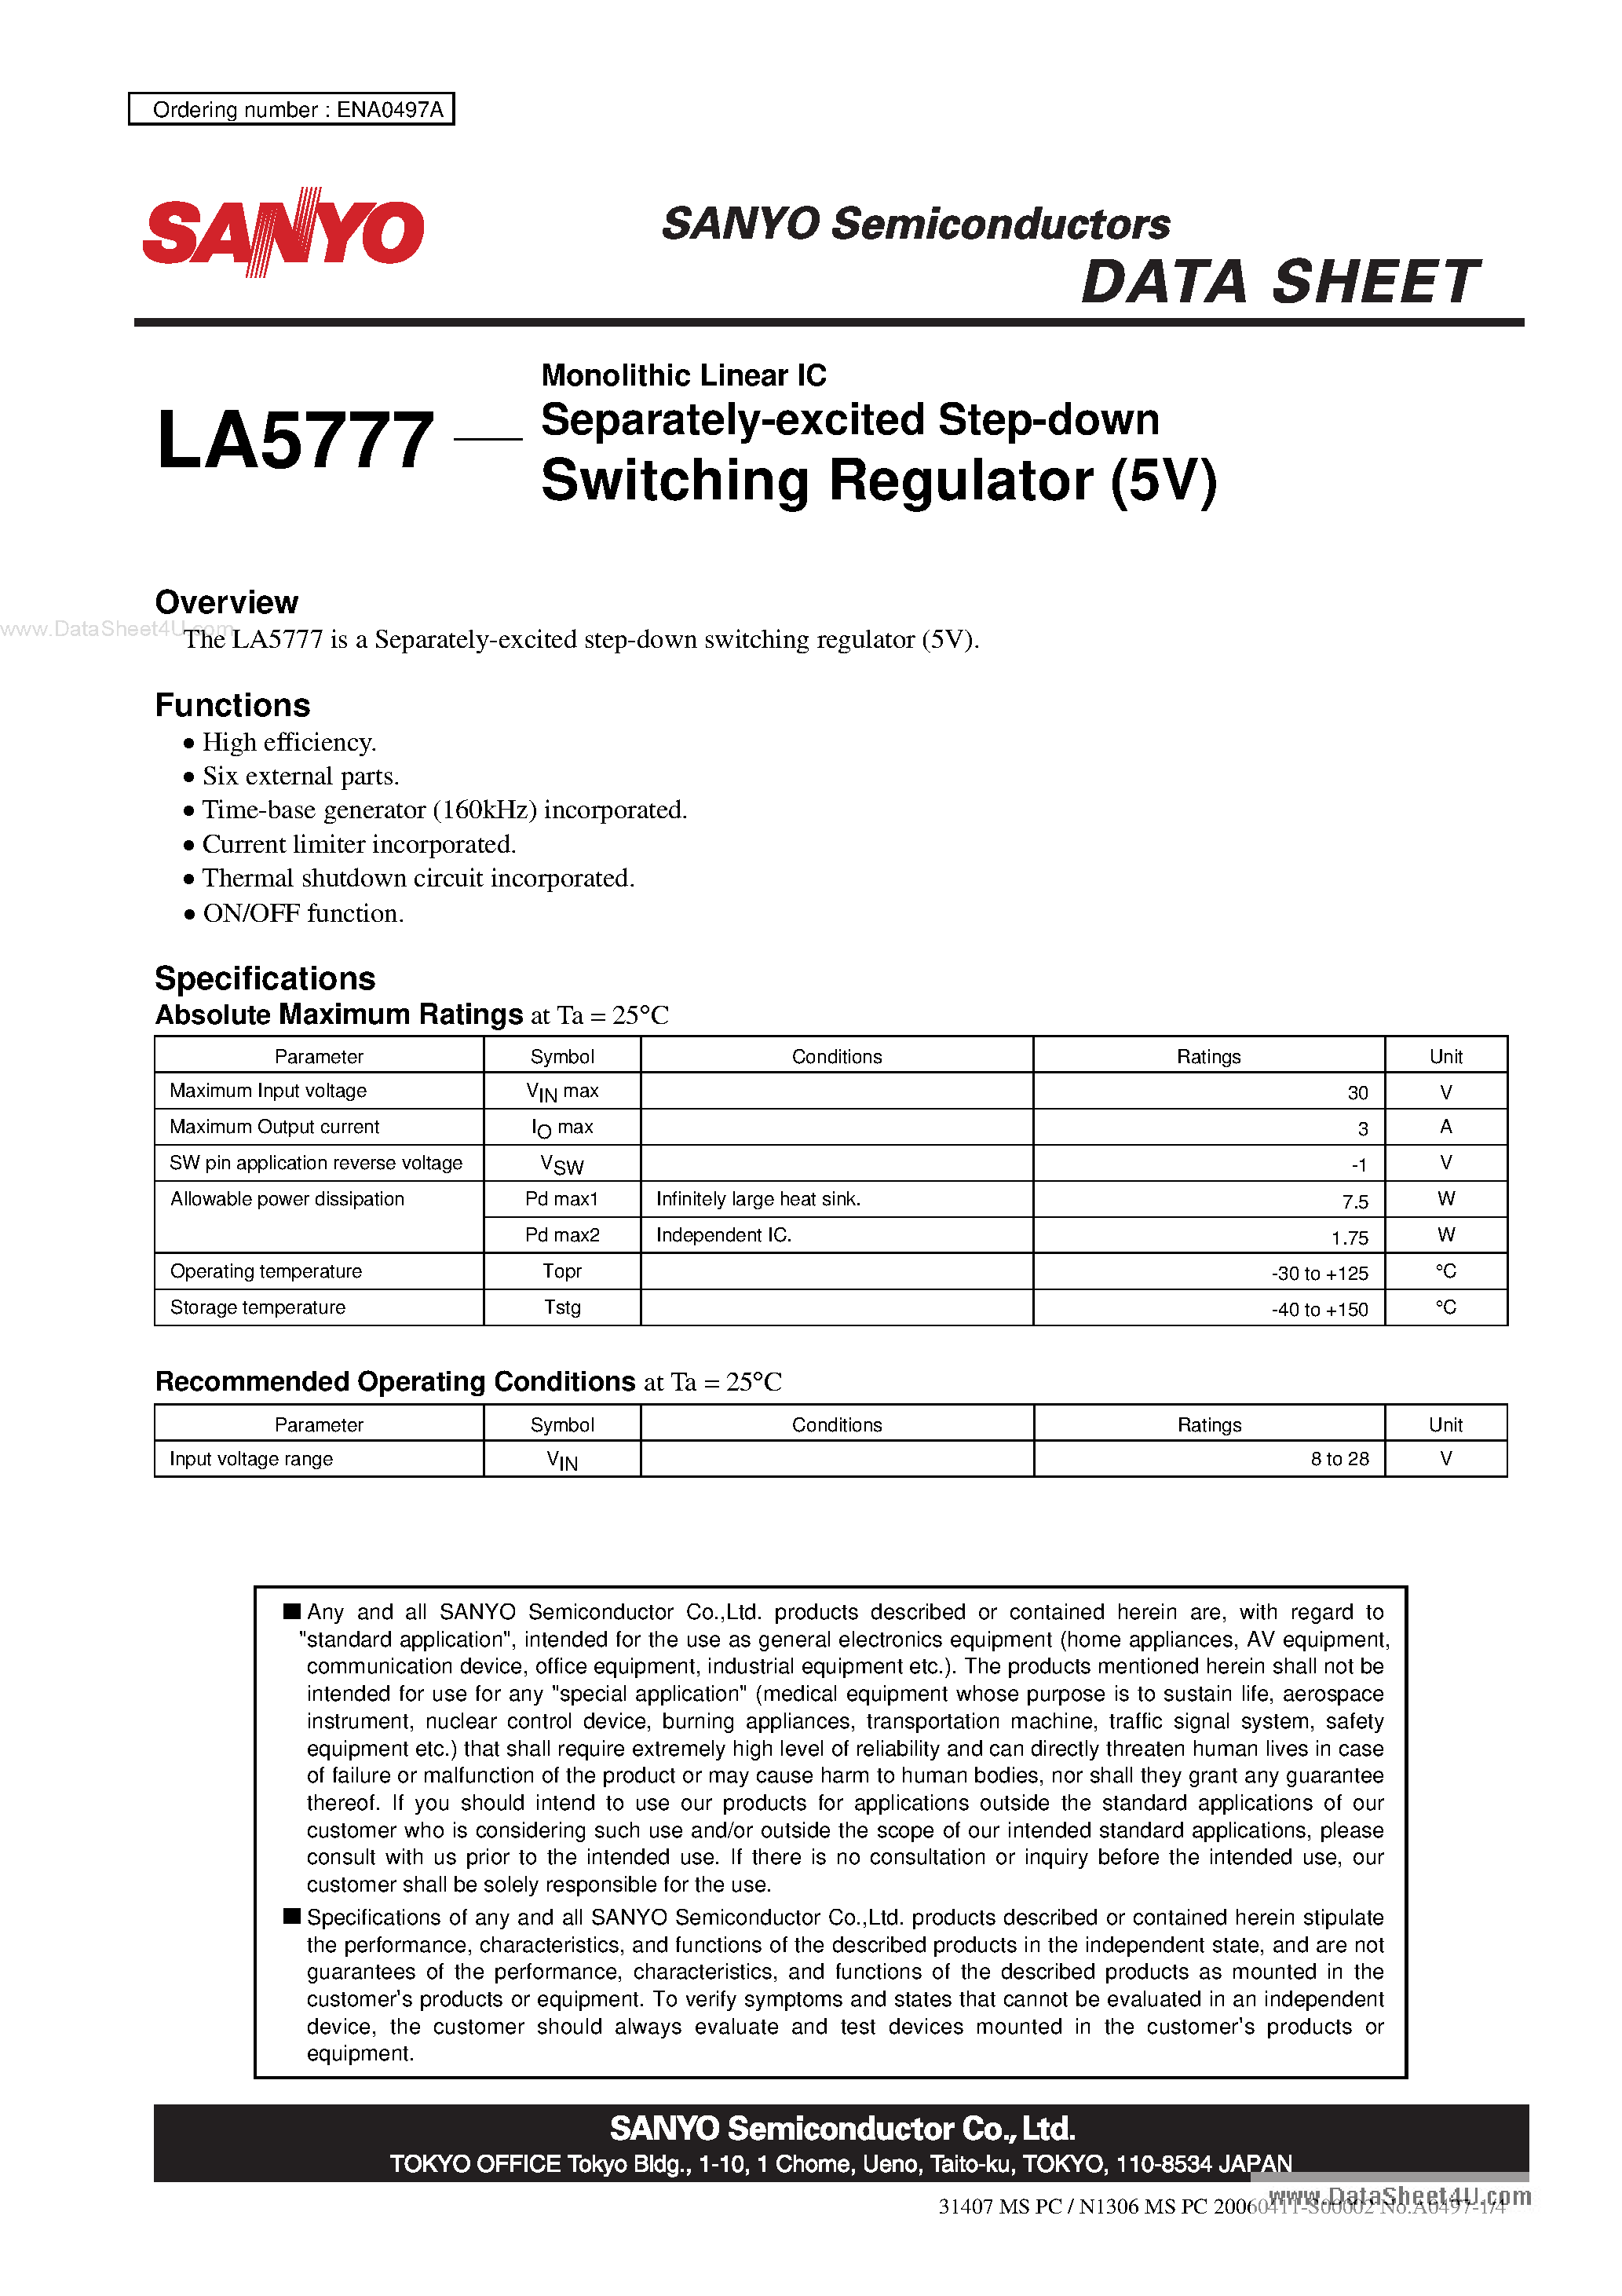 Datasheet LA5777 - Monolithic Linear IC Separately-excited Step-down Switching Regulator page 1